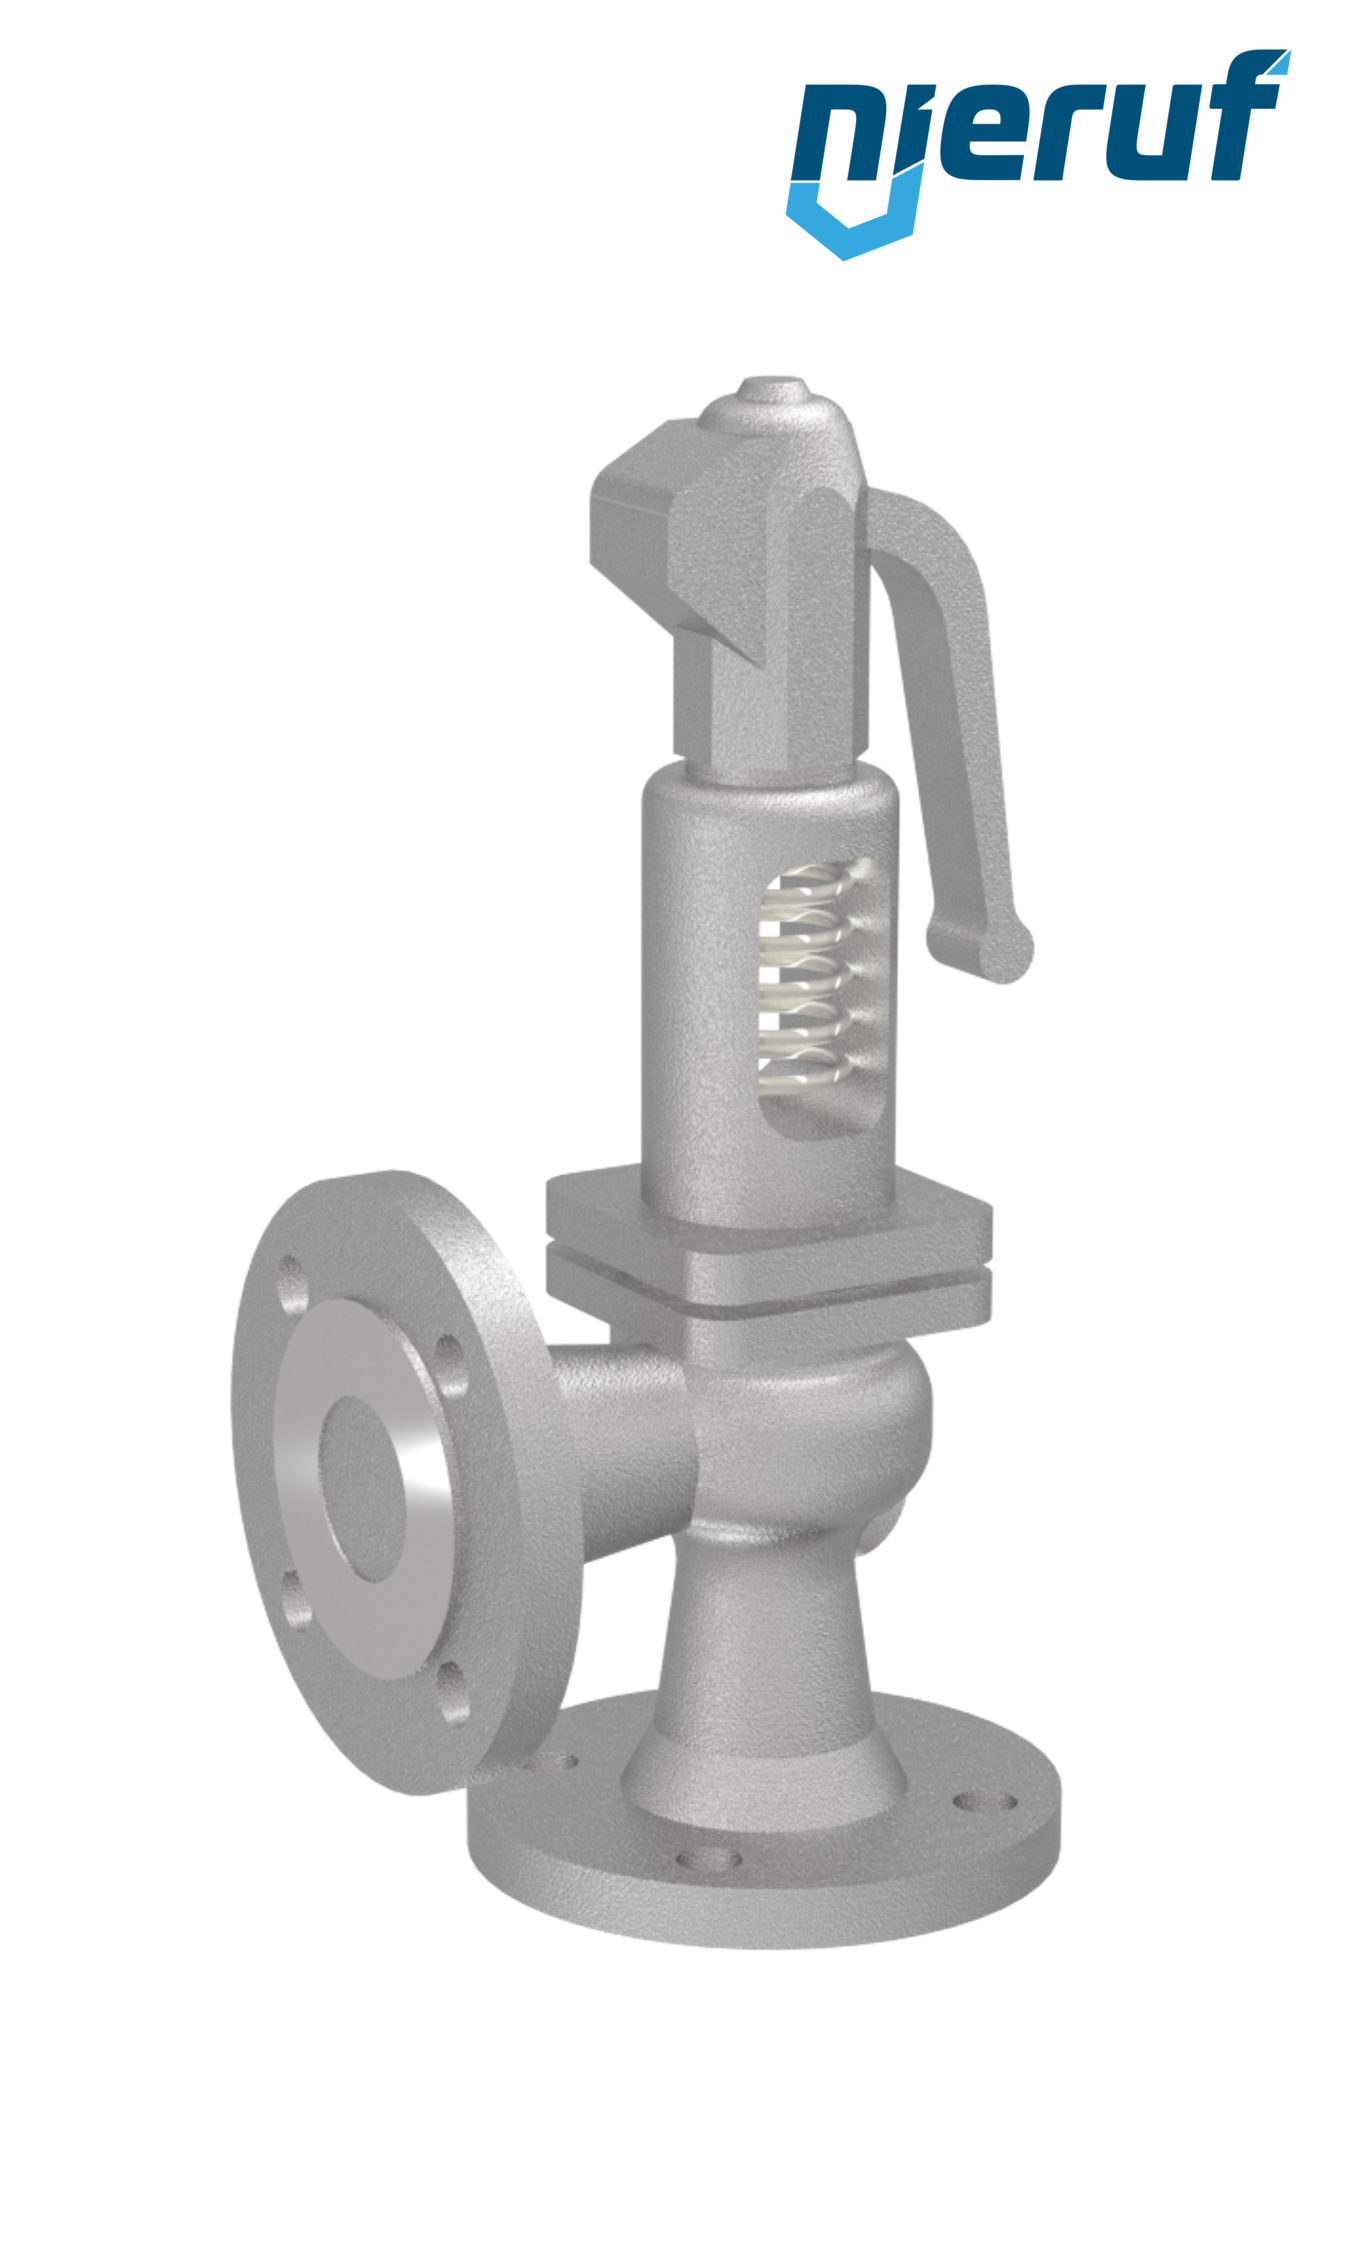 flange-safety valve DN40/DN40 SF0202, cast steel EPDM, with lever